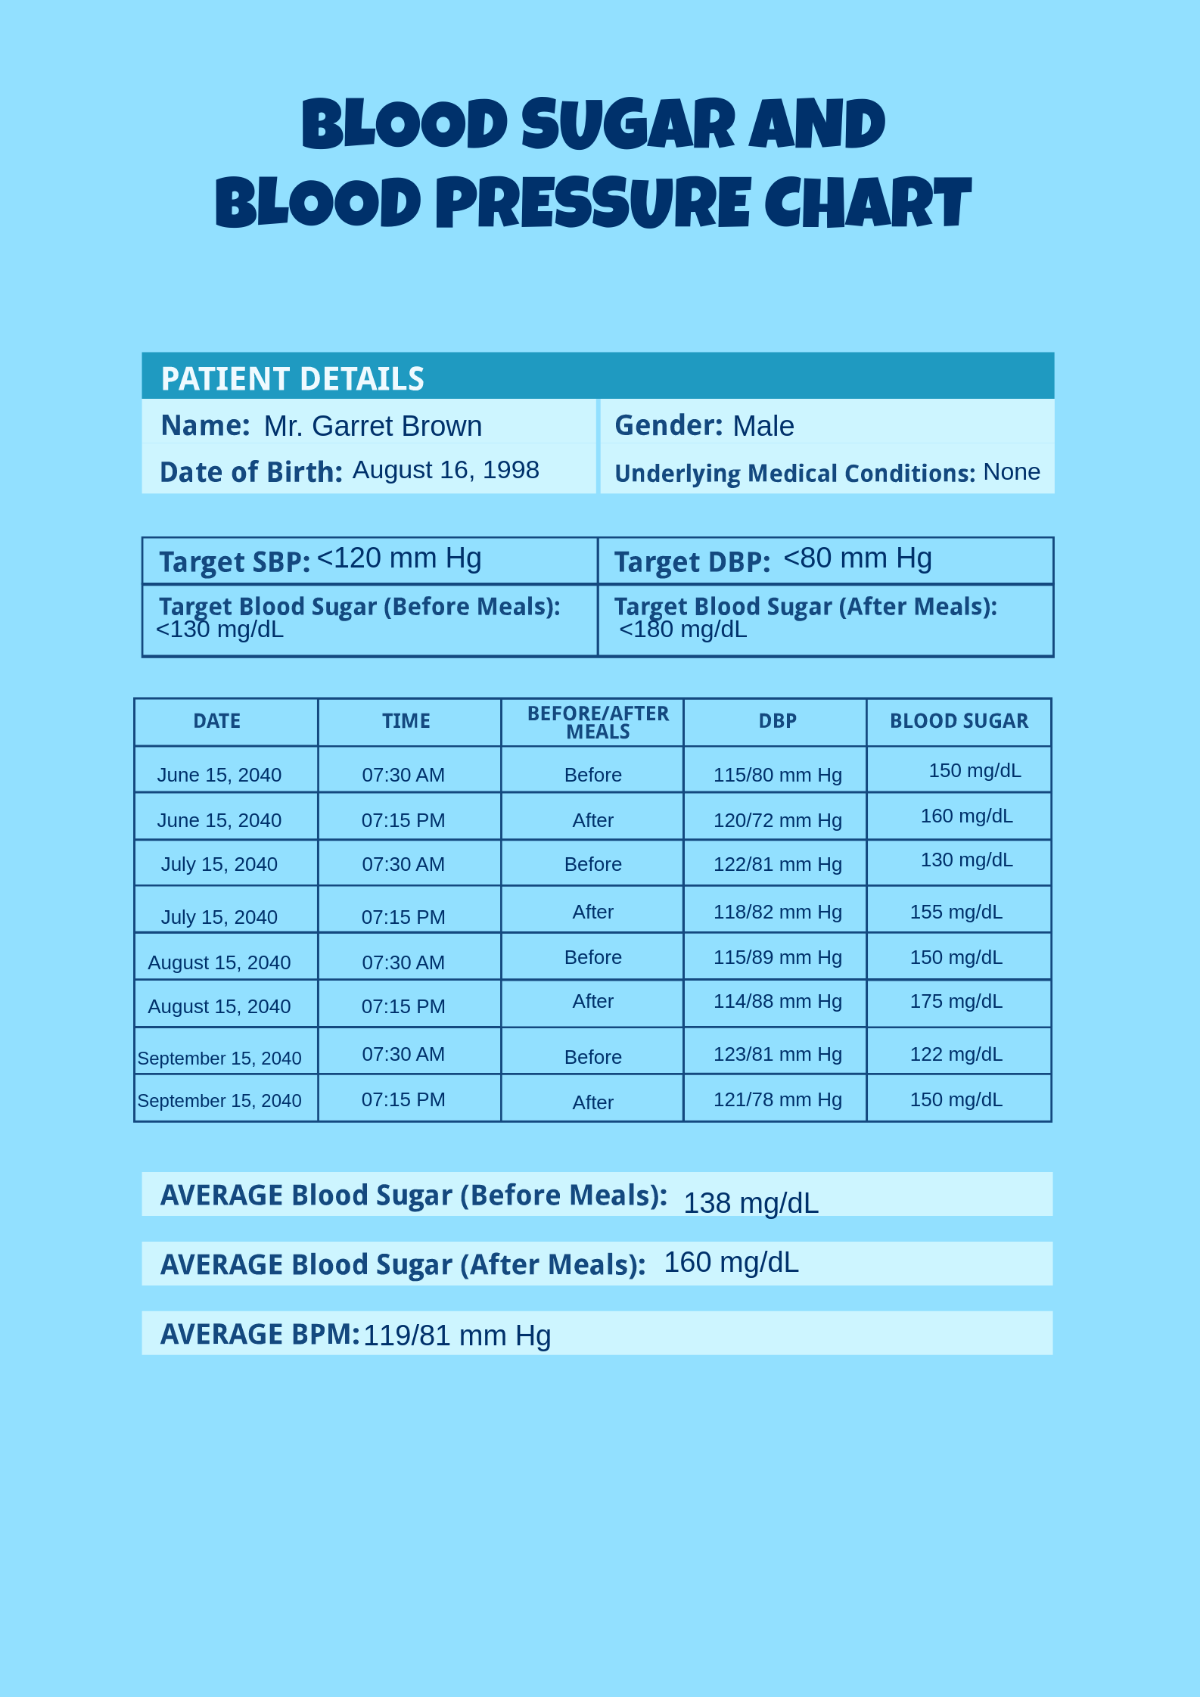 Blood Sugar and Blood Pressure Chart Template